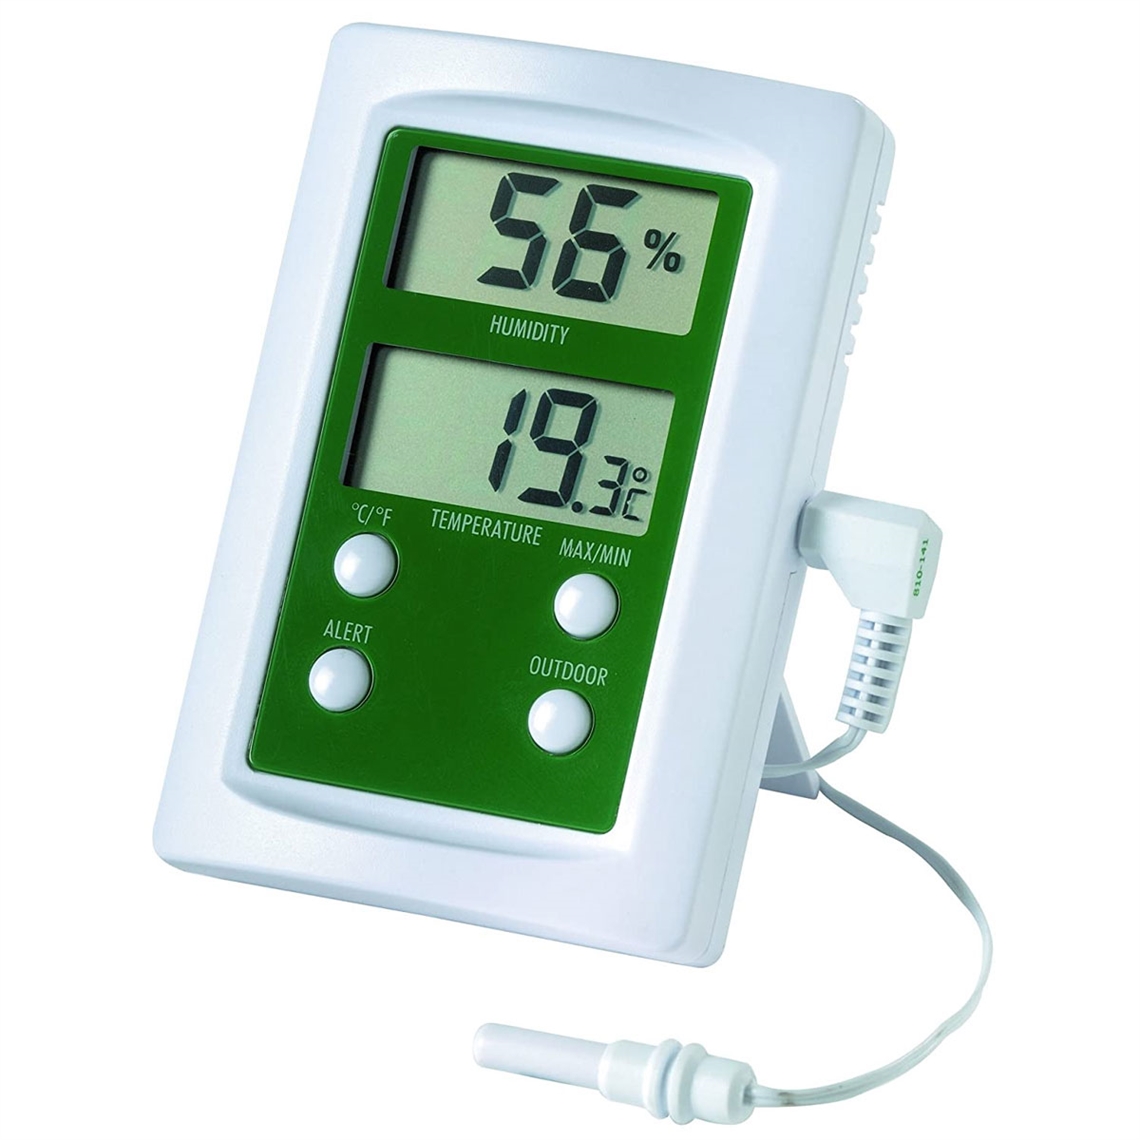 View more wine preservation from our Thermo Hygrometers range